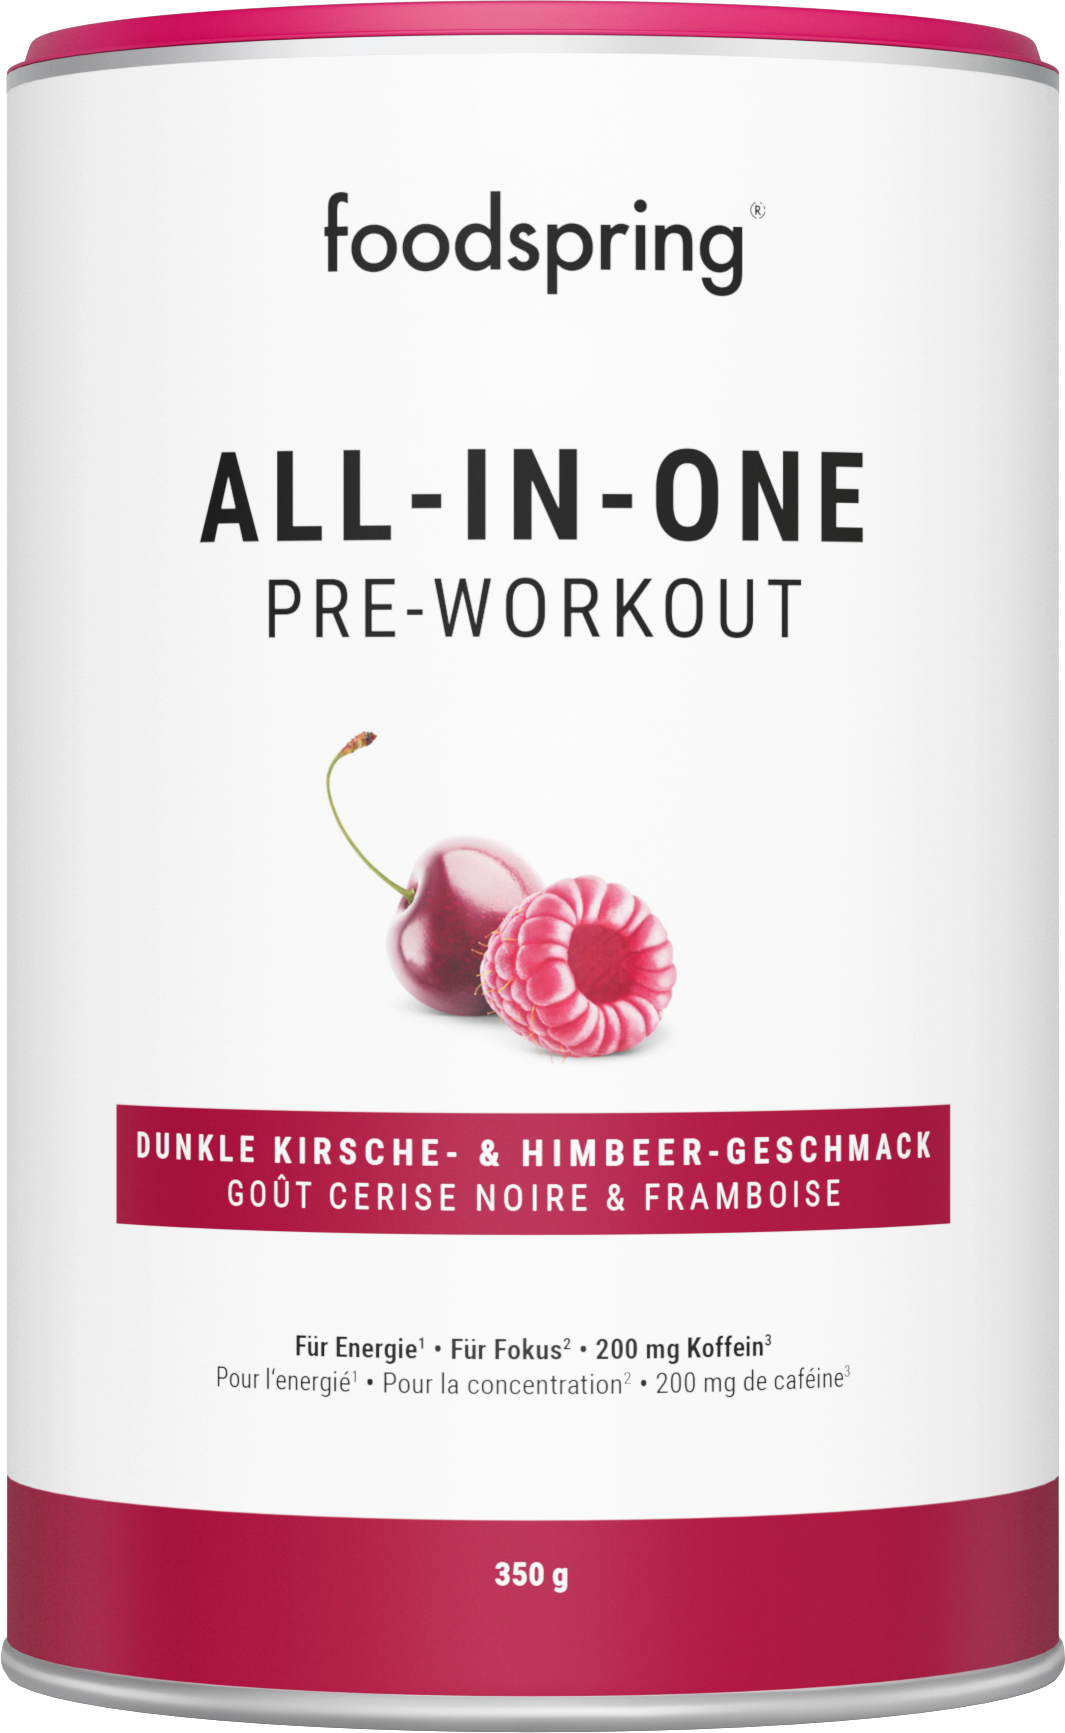 foodspring – All-in-One Pre-Workout_Dunkle Kirsche- und Himbeer Geschmack_EUR 29,99.png